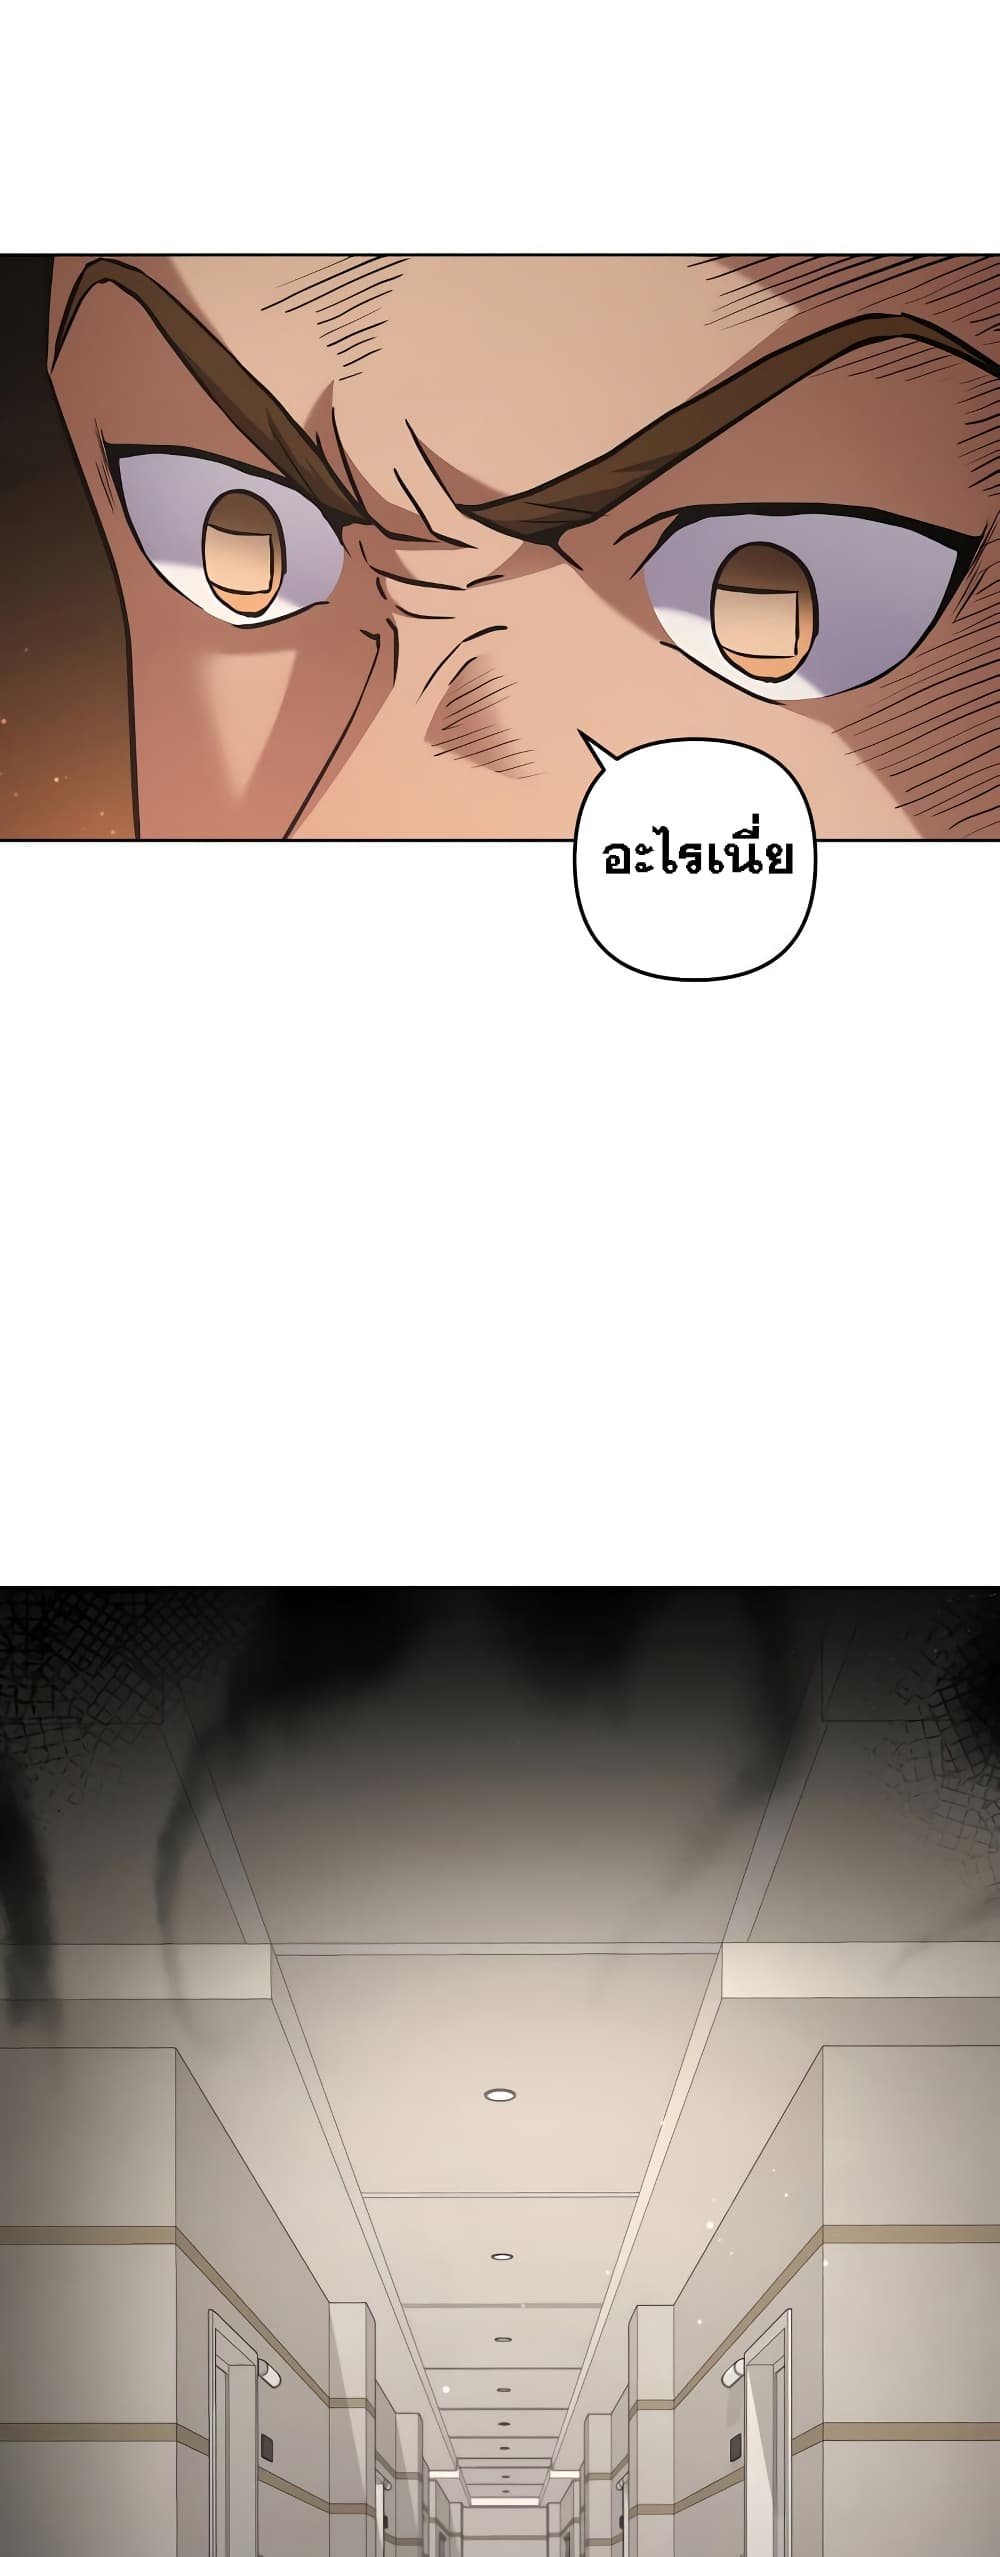 Surviving in an Action Manhwa 9-9